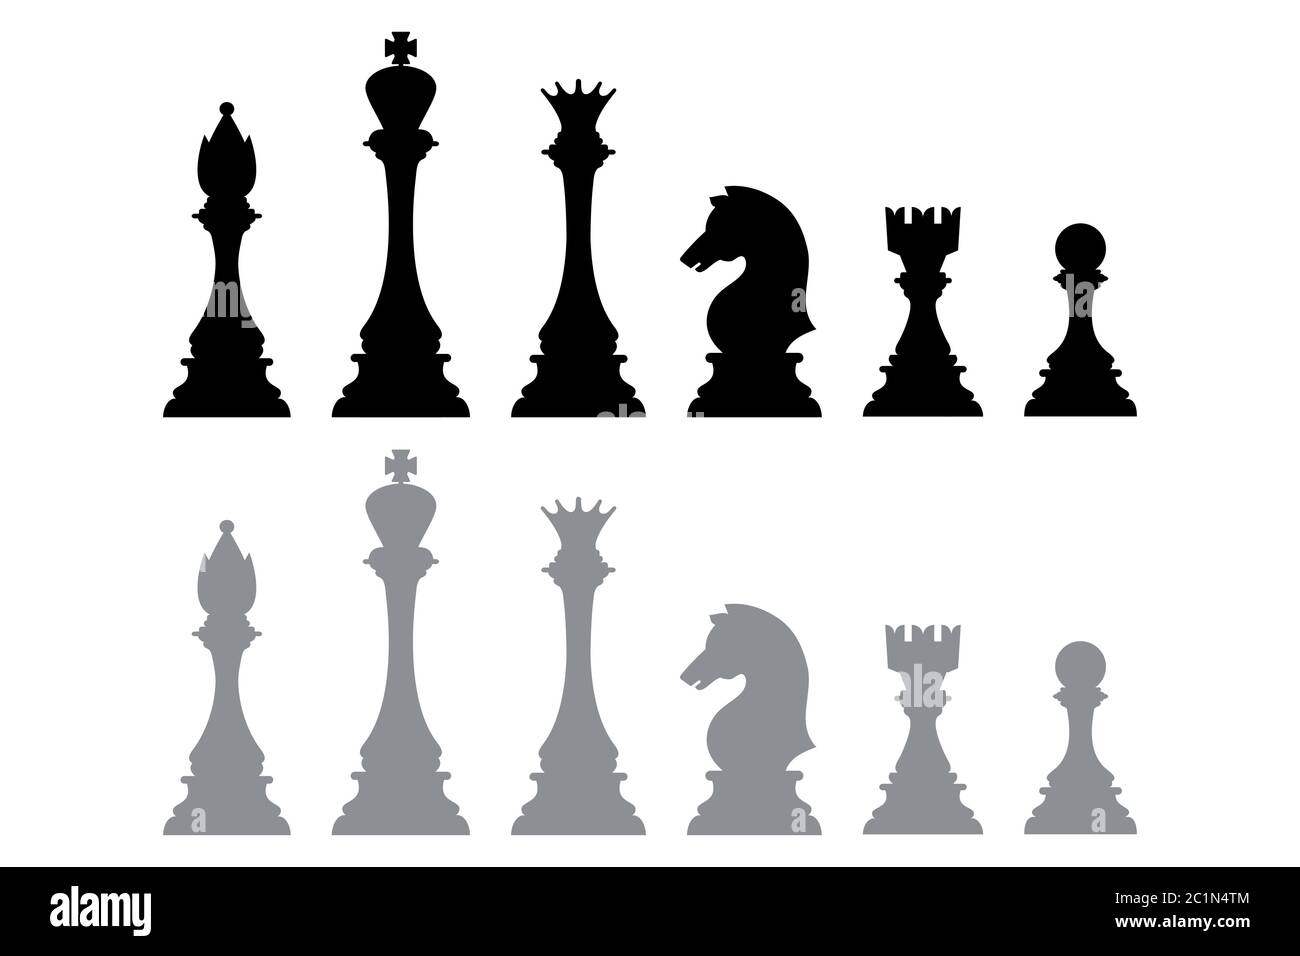 Silhouette icons from chess pieces, such as kings, bishops, queens, knights, rooks, and pawns. Element vector of chess games. Stock Vector